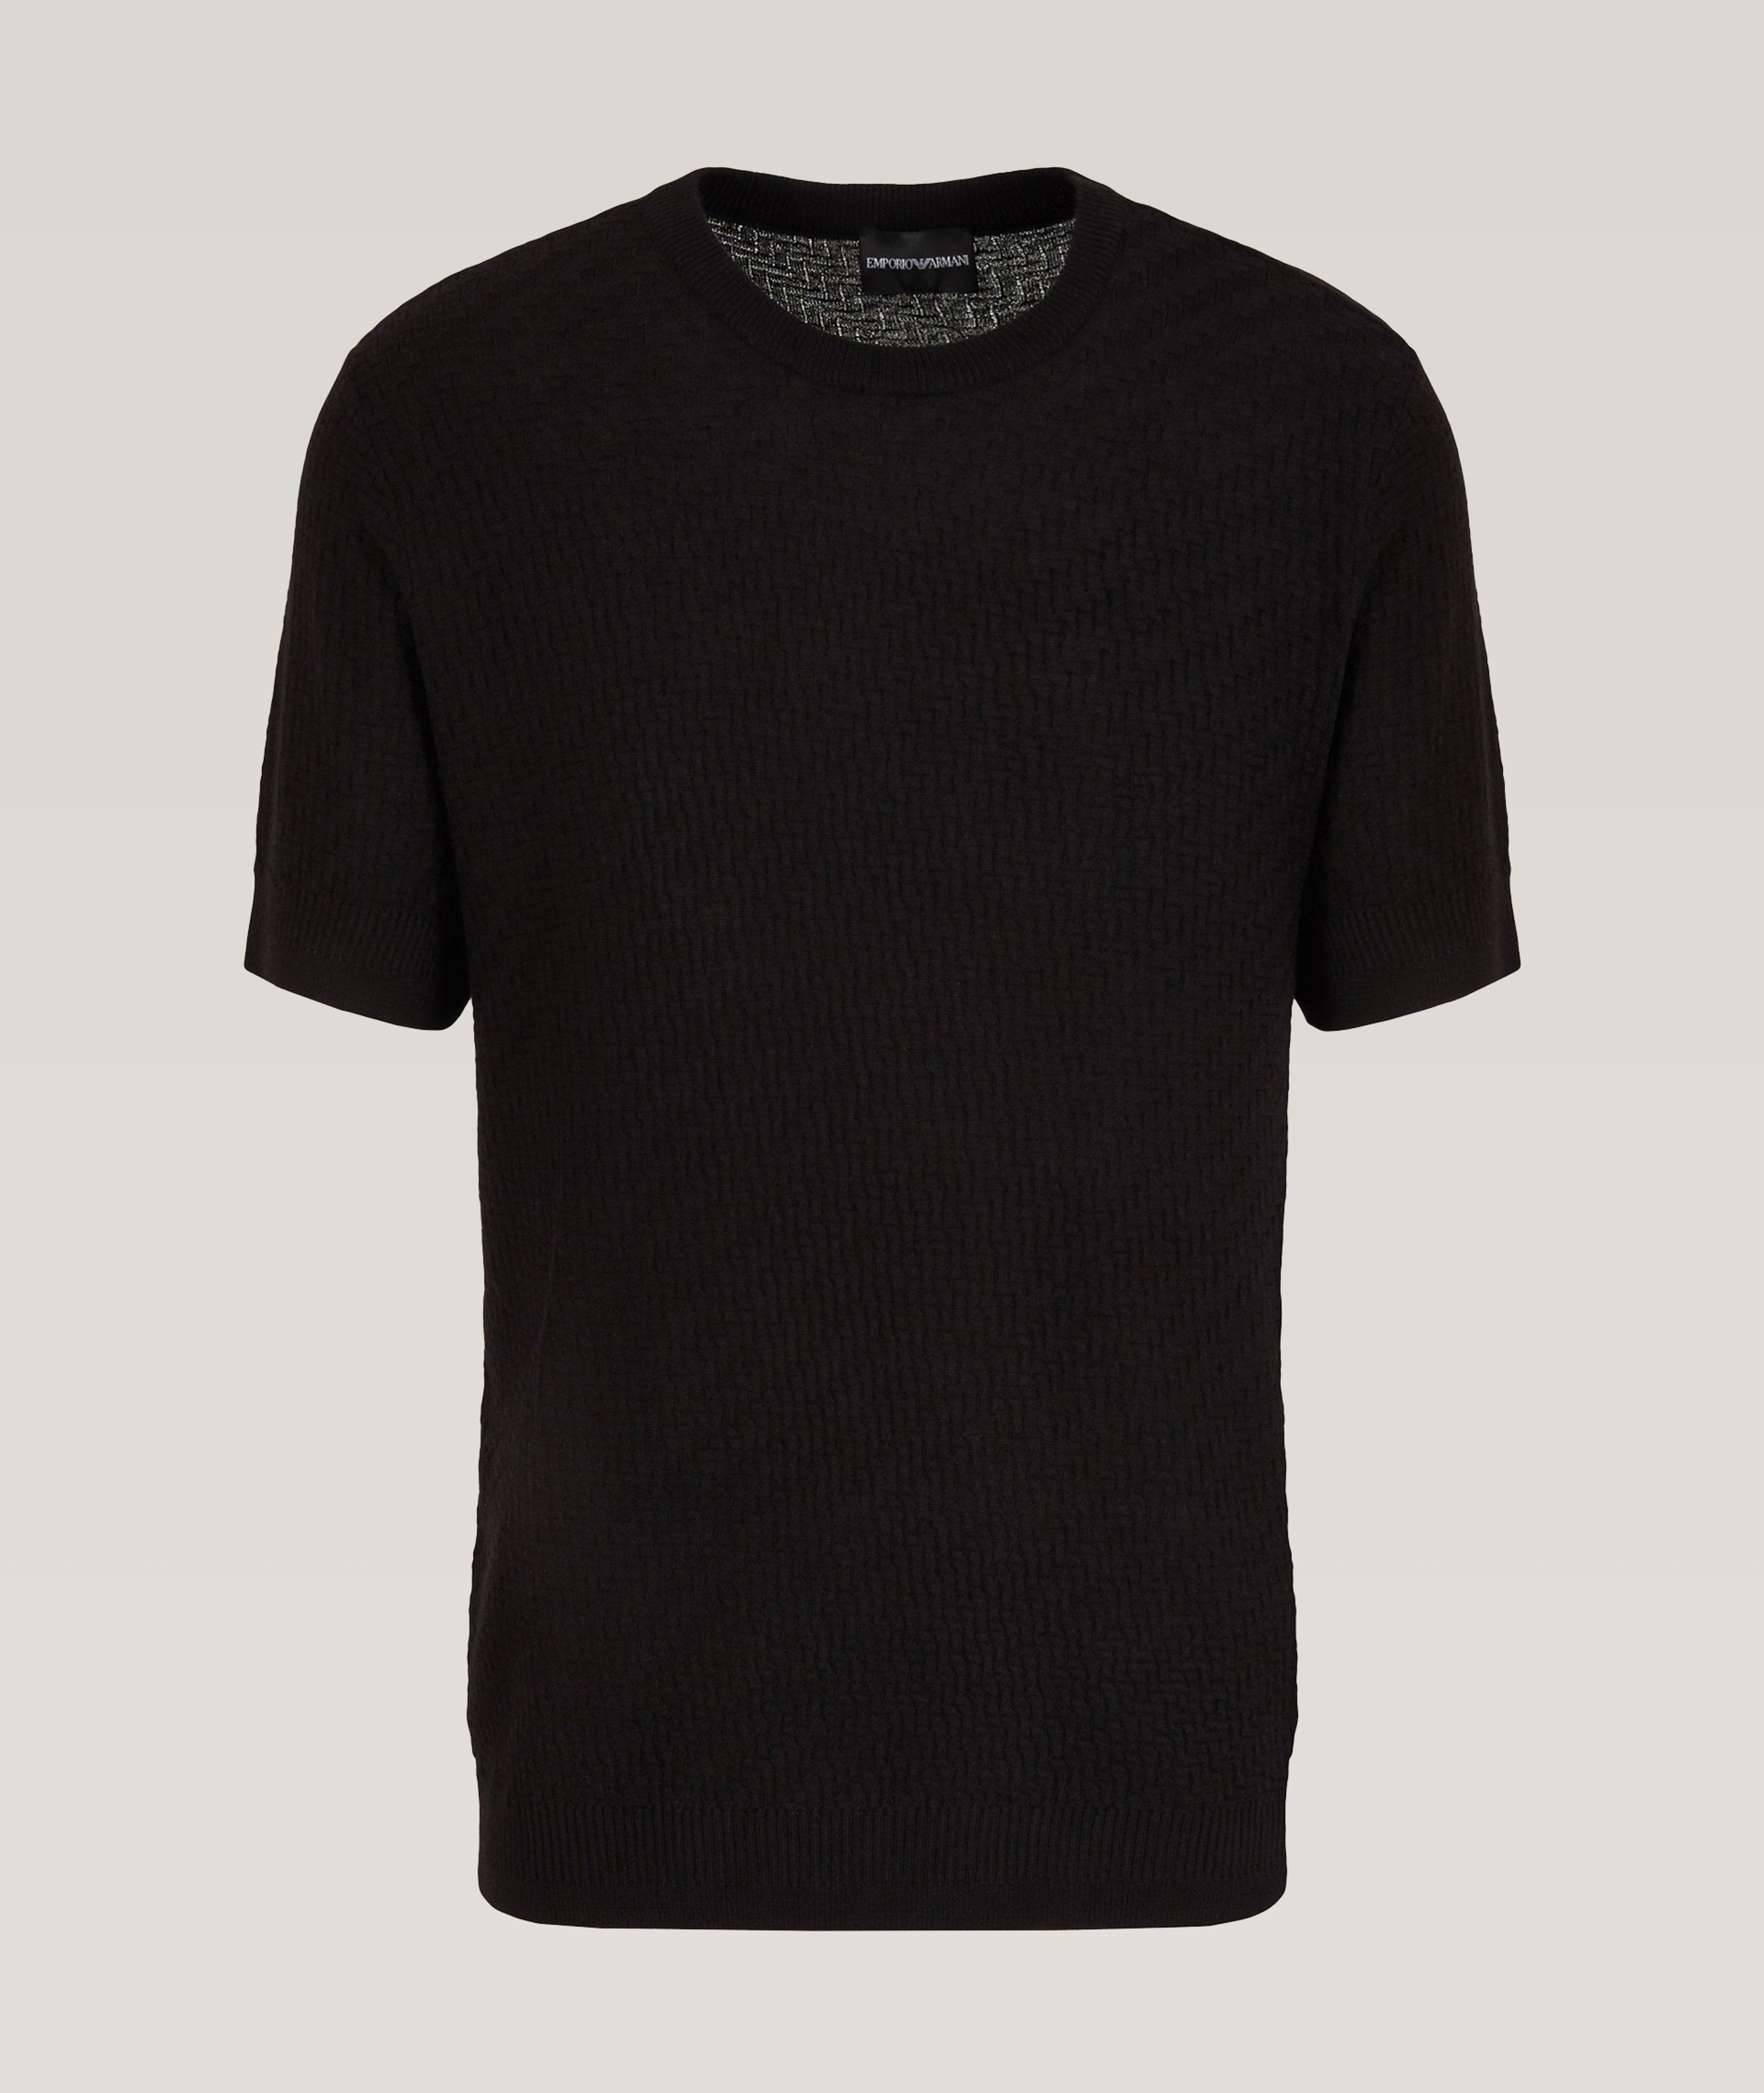 Embossed Two-Tone Lyocell-Blend T-Shirt image 0